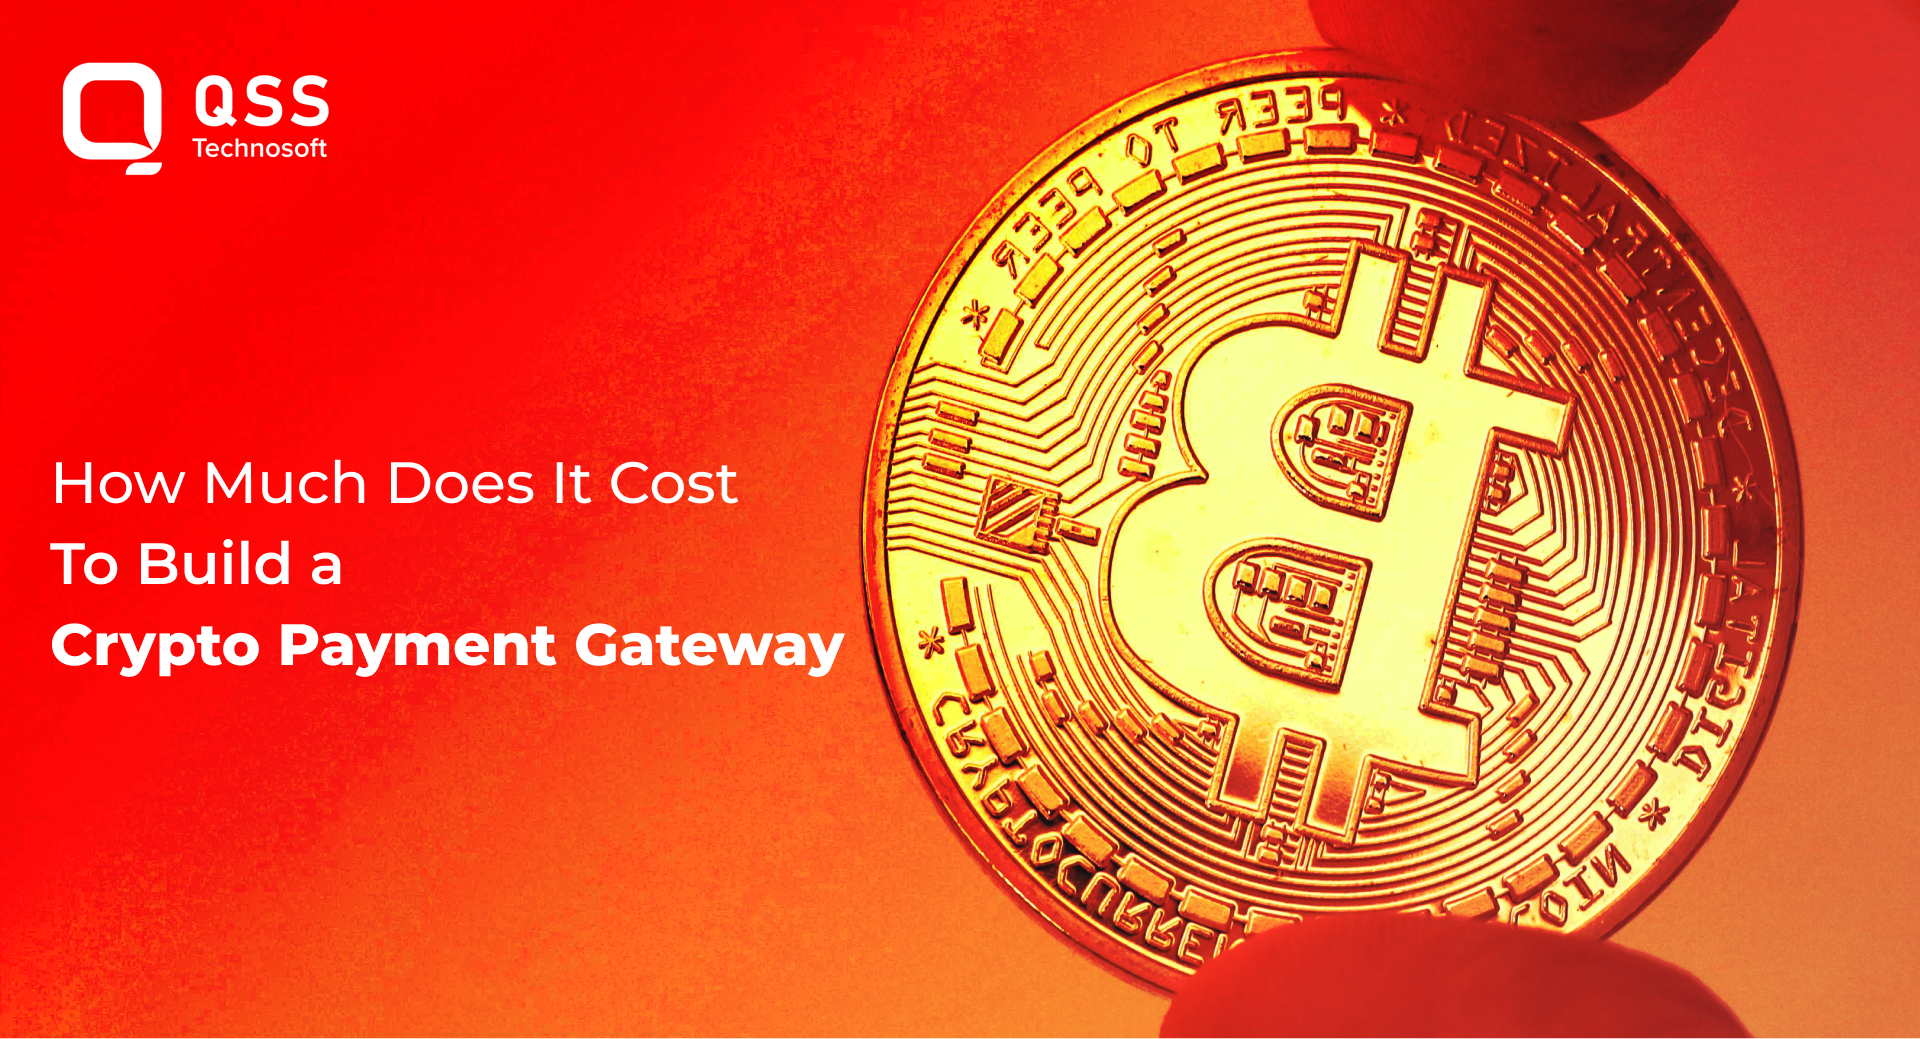 How Much Does It Cost to Build a Crypto Payment Gateway like SpicePay?